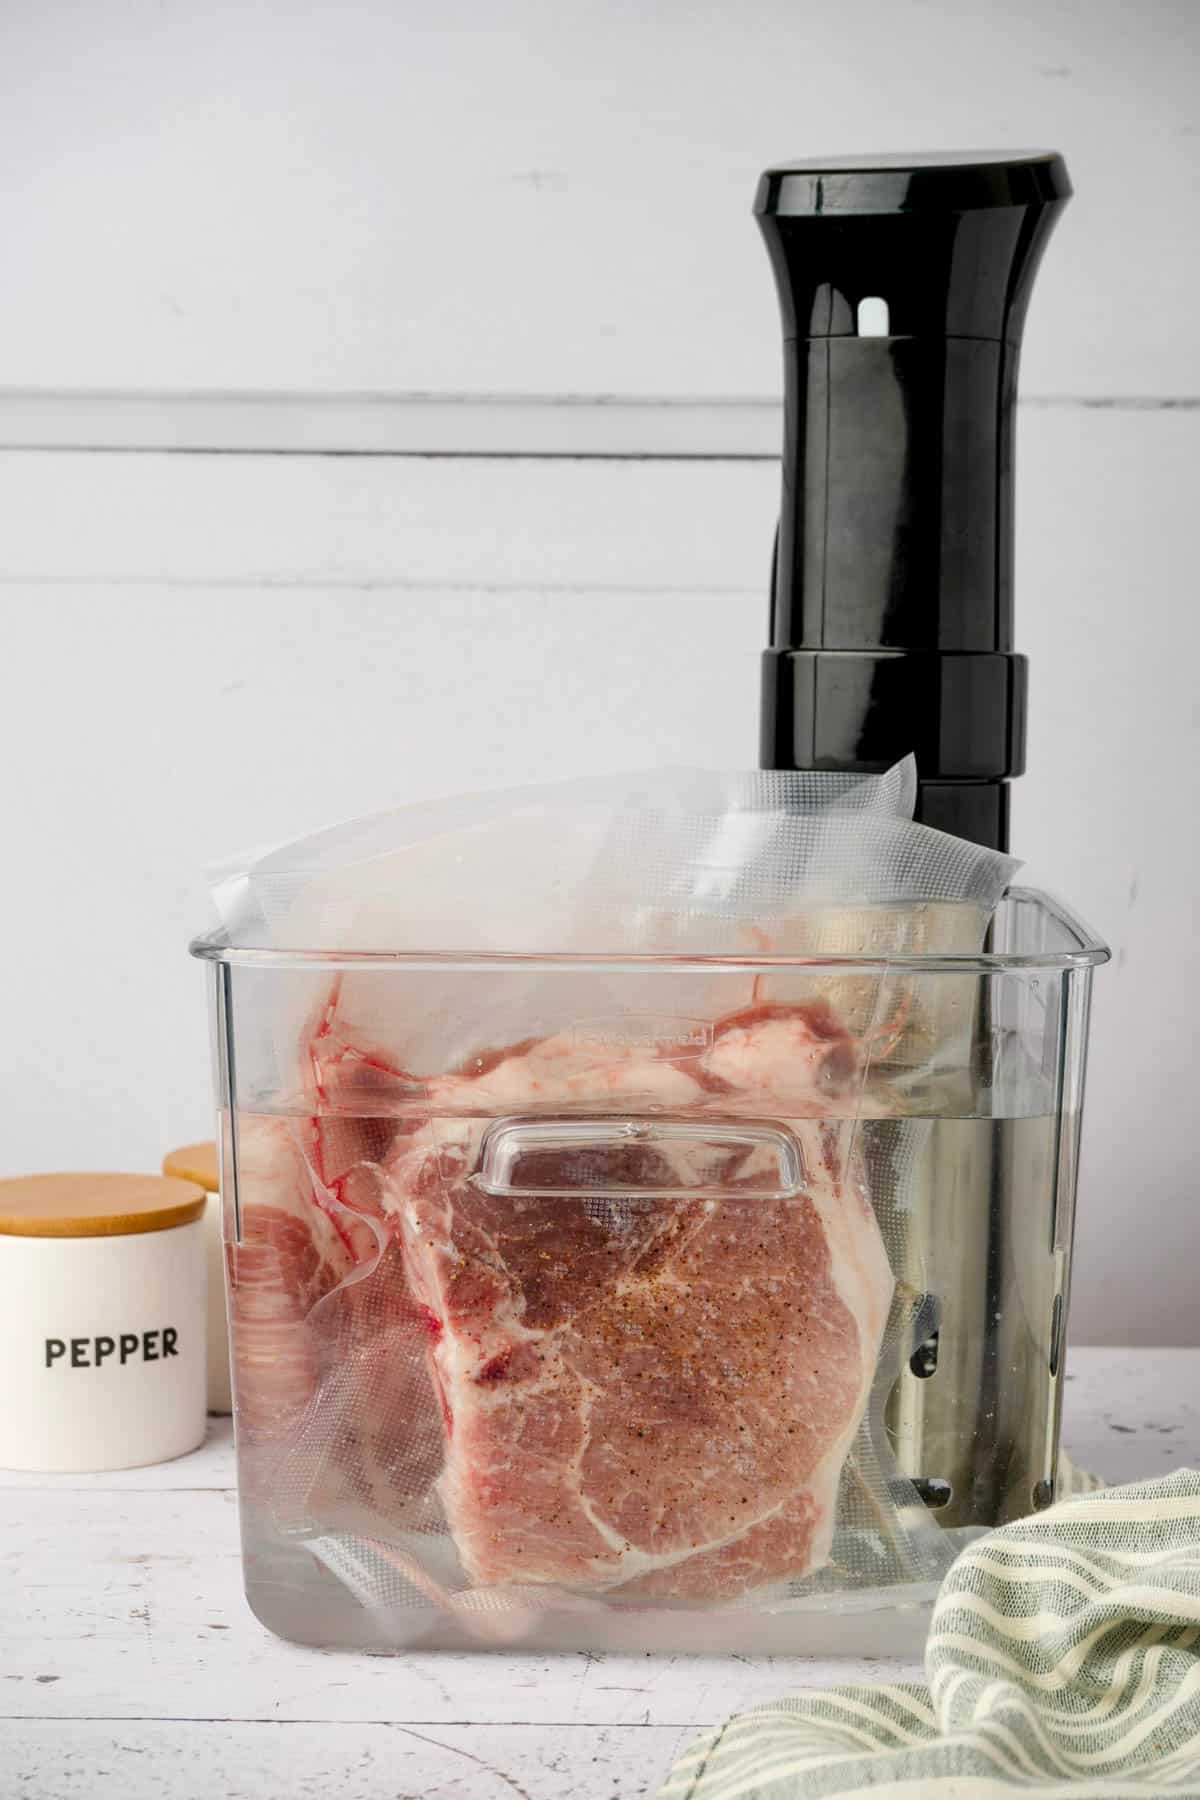 raw pork chops cooking in a sous vide water bath for sous vide pork chops